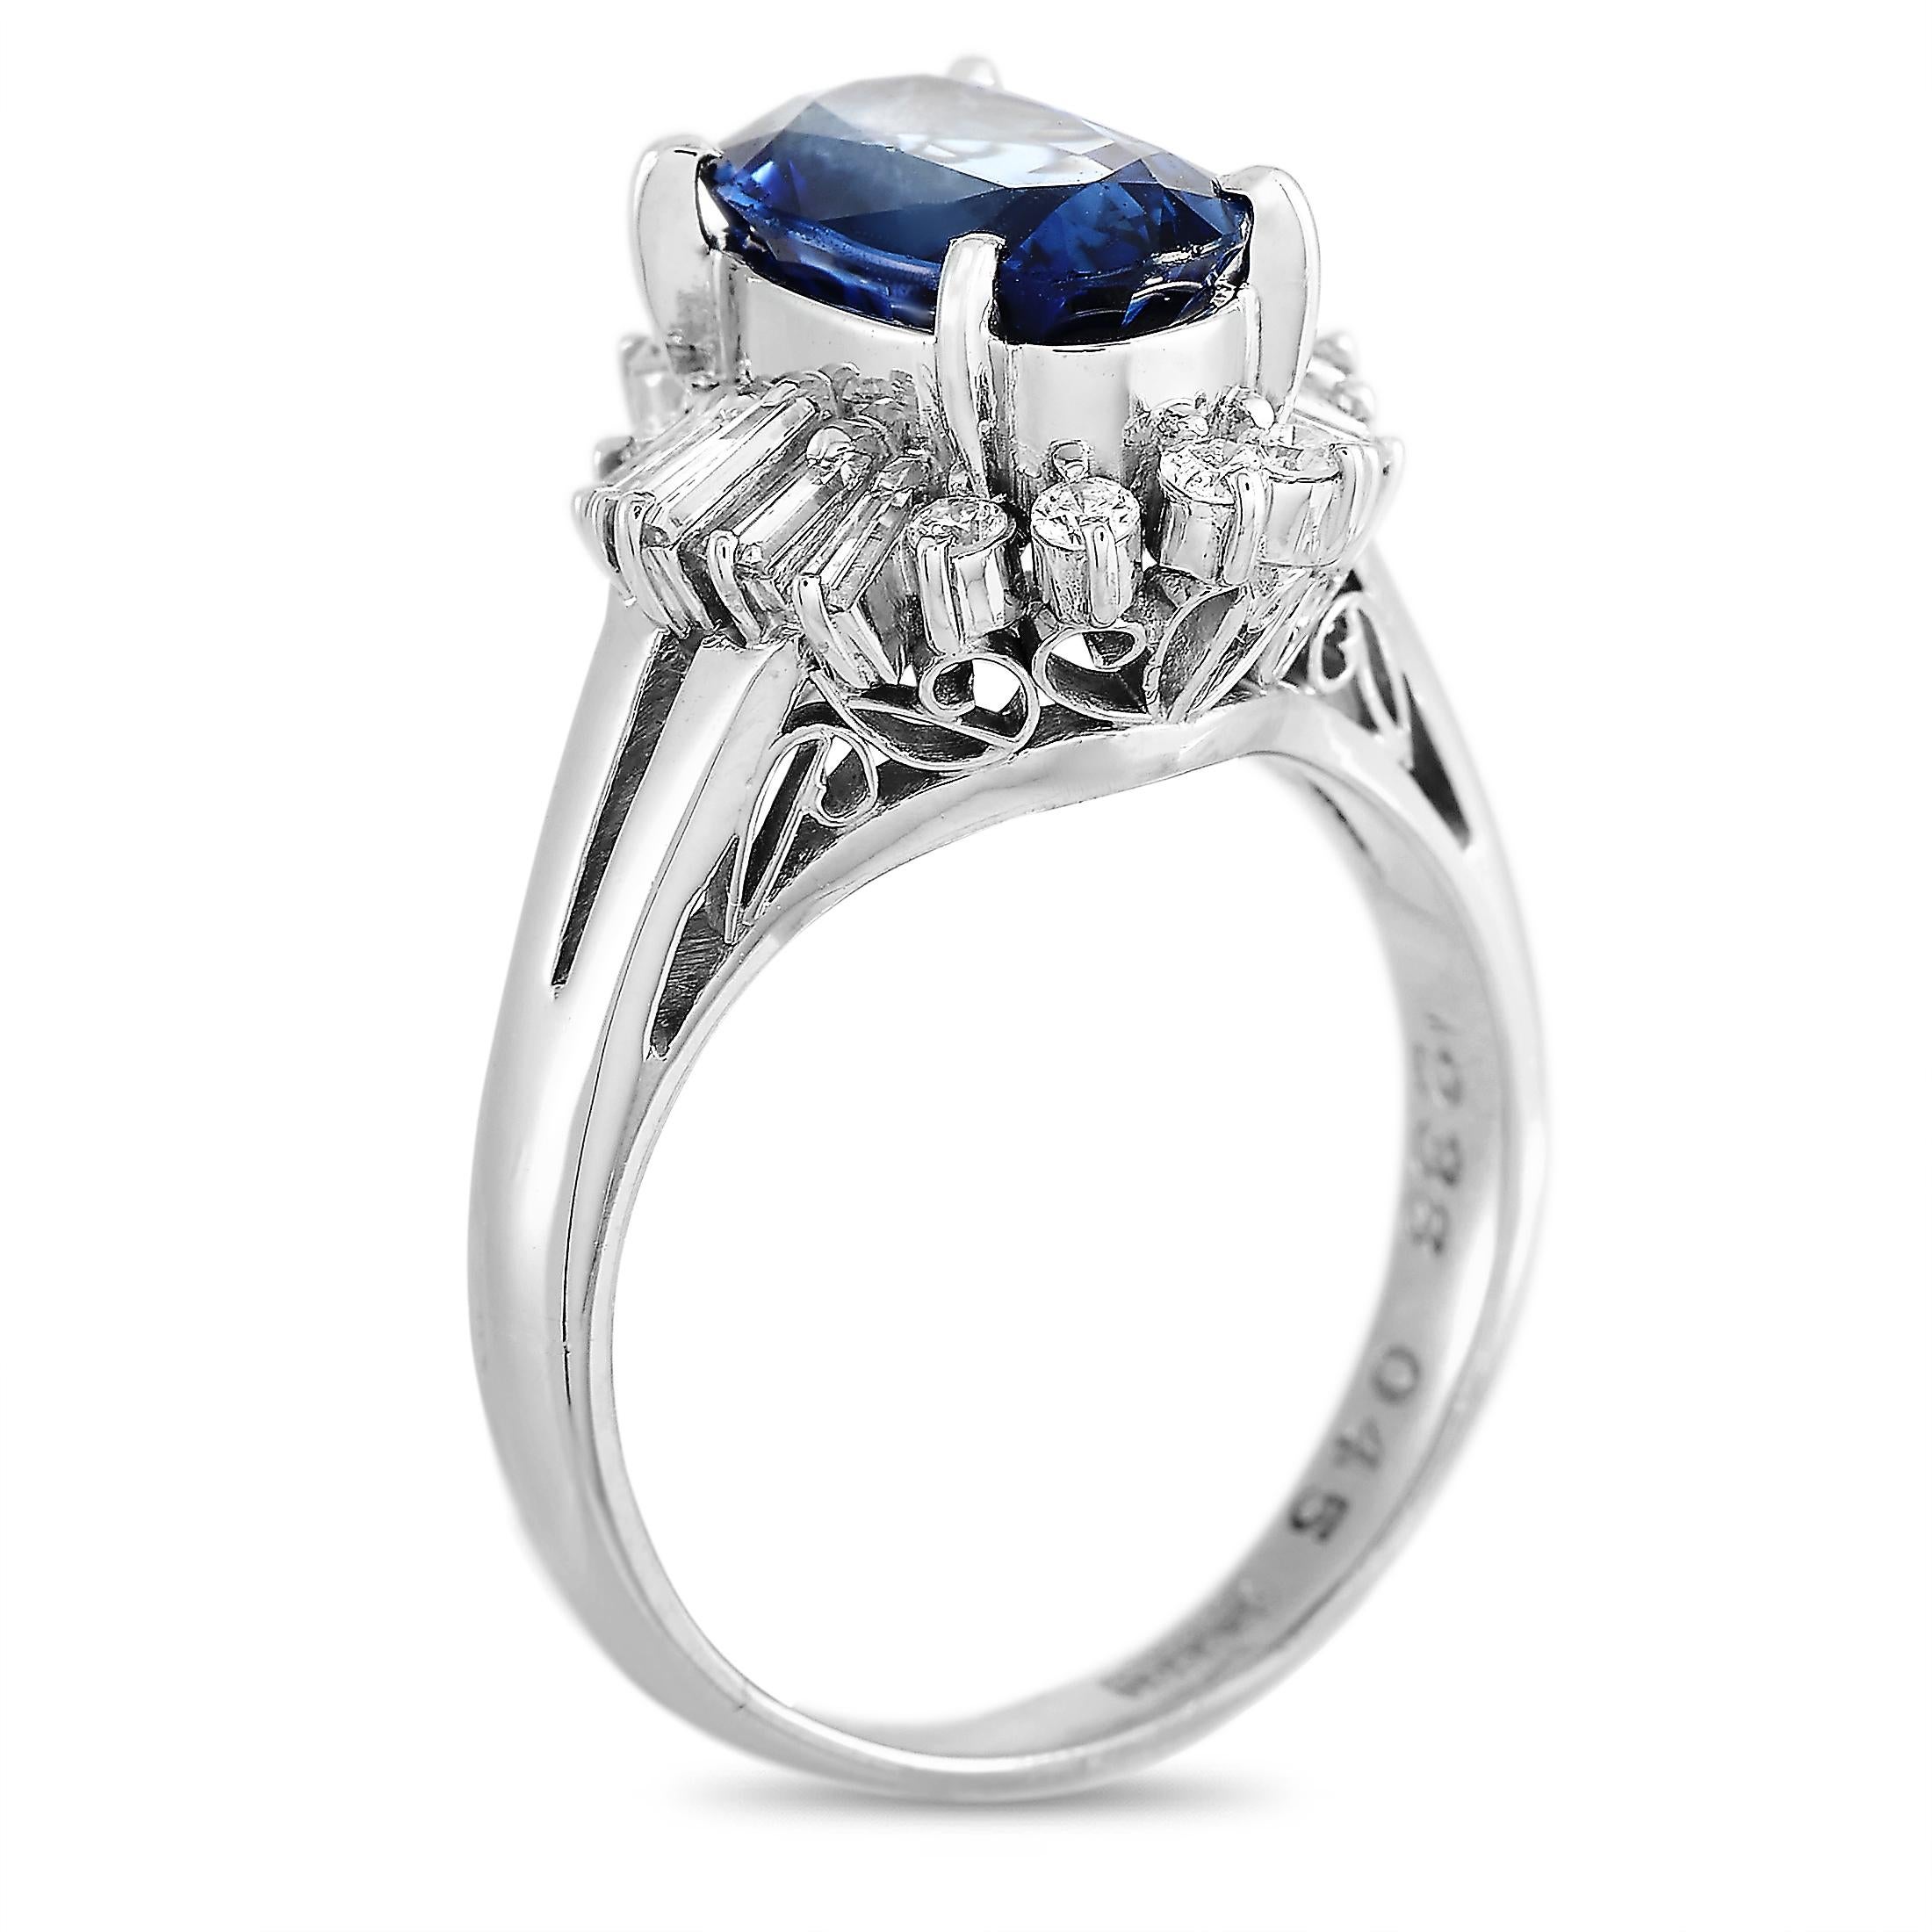 This LB Exclusive ring is made of platinum and embellished with a 2.36 ct sapphire and a total of 0.45 carats of diamonds. The ring weighs 6.6 grams and boasts band thickness of 3 mm and top height of 9 mm, while top dimensions measure 14 by 12 mm.
